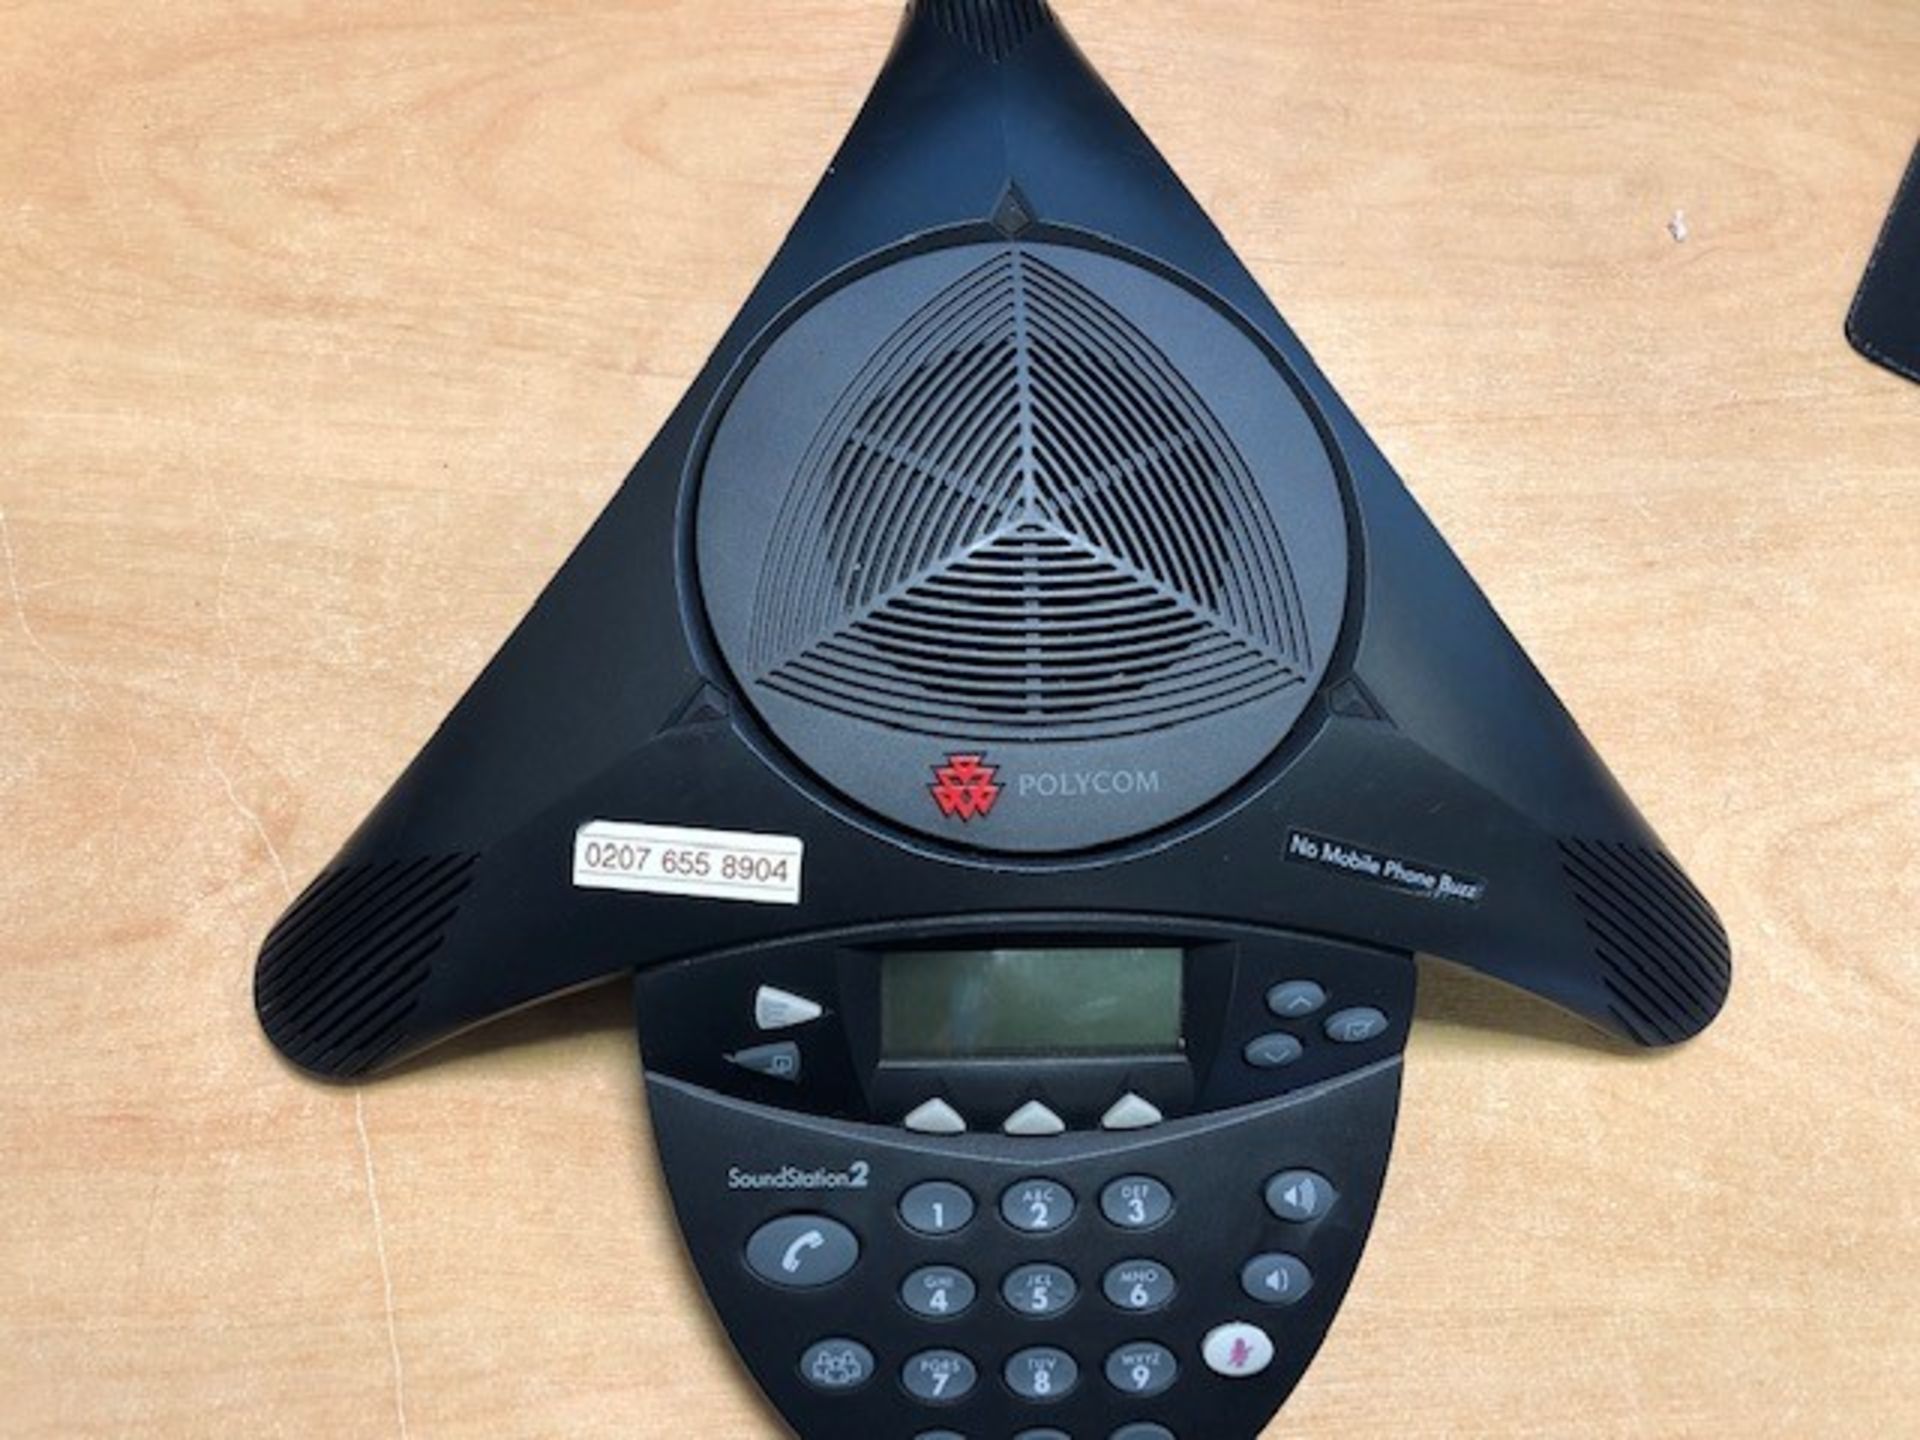 Tested & Working Desk Phones - Avaya & Polycom - 93 Items - RRP £2,263 - Image 6 of 7